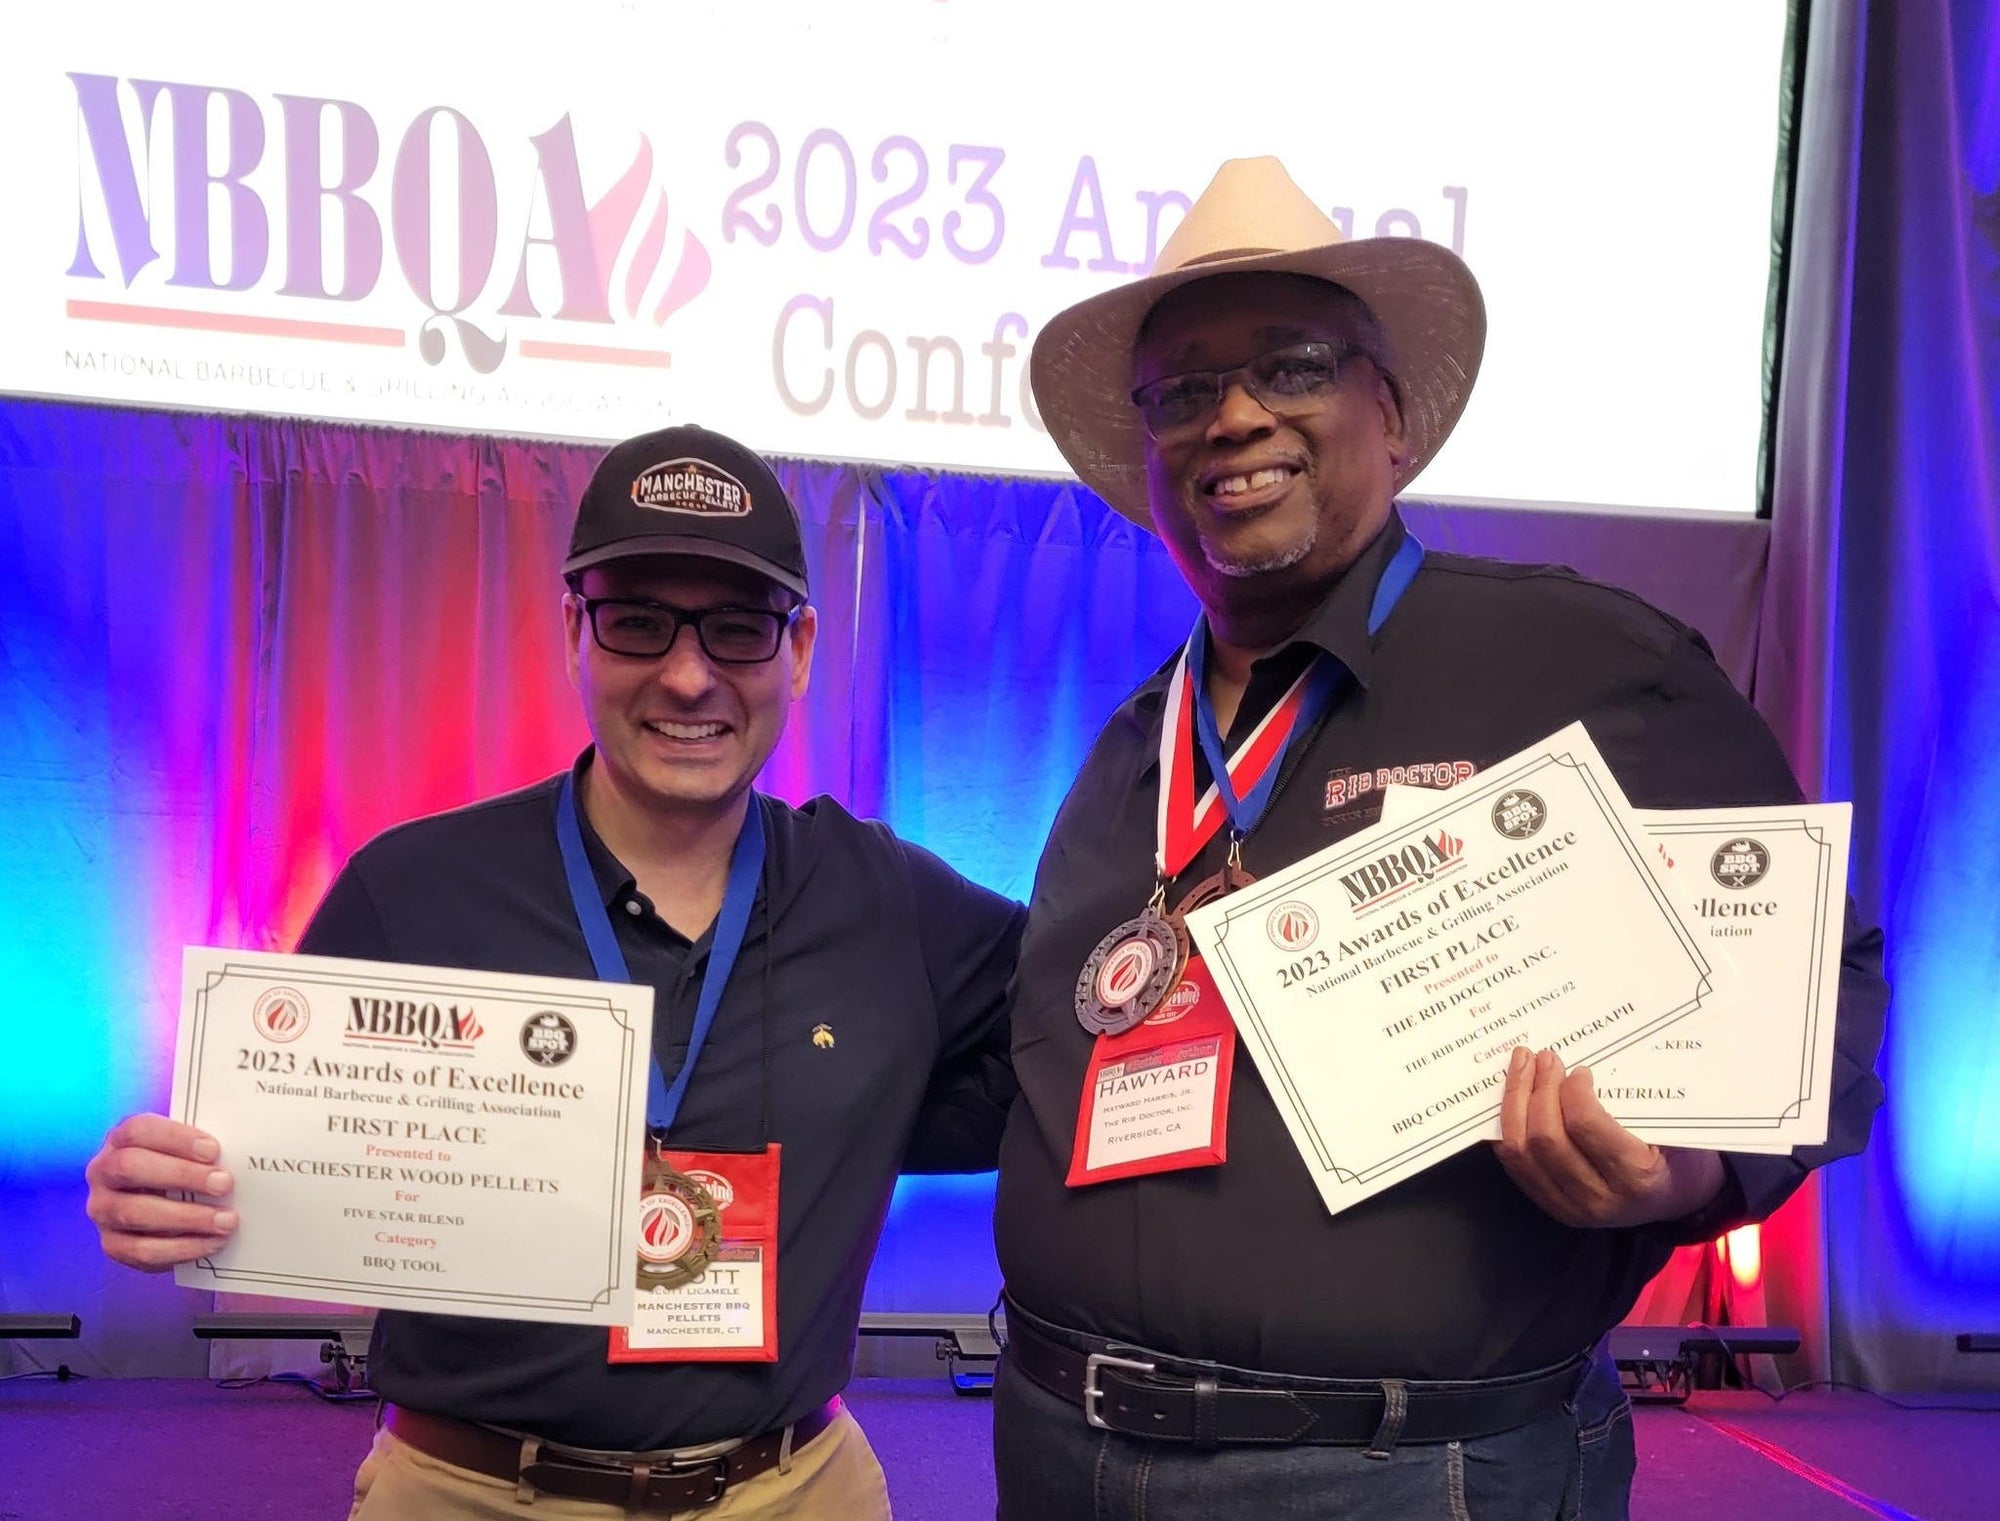 Manchester Barbecue Pellets Wins FIRST PLACE At 2023 National Barbecue & Grilling Association Awards of Excellence!